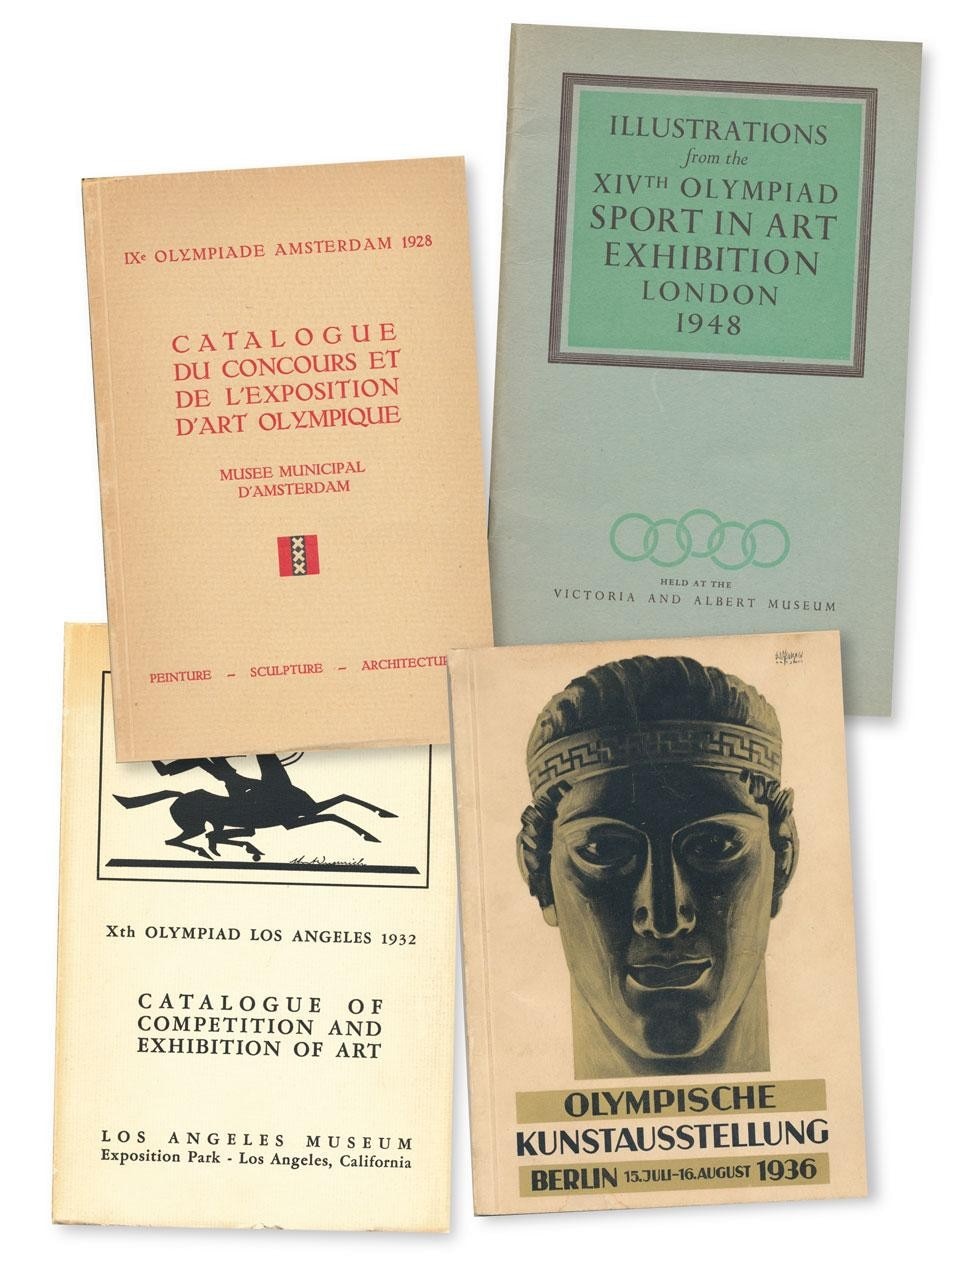 Covers of the catalogues
of the Olympic Arts
competitions and exhibitions
from 1928 to 1948